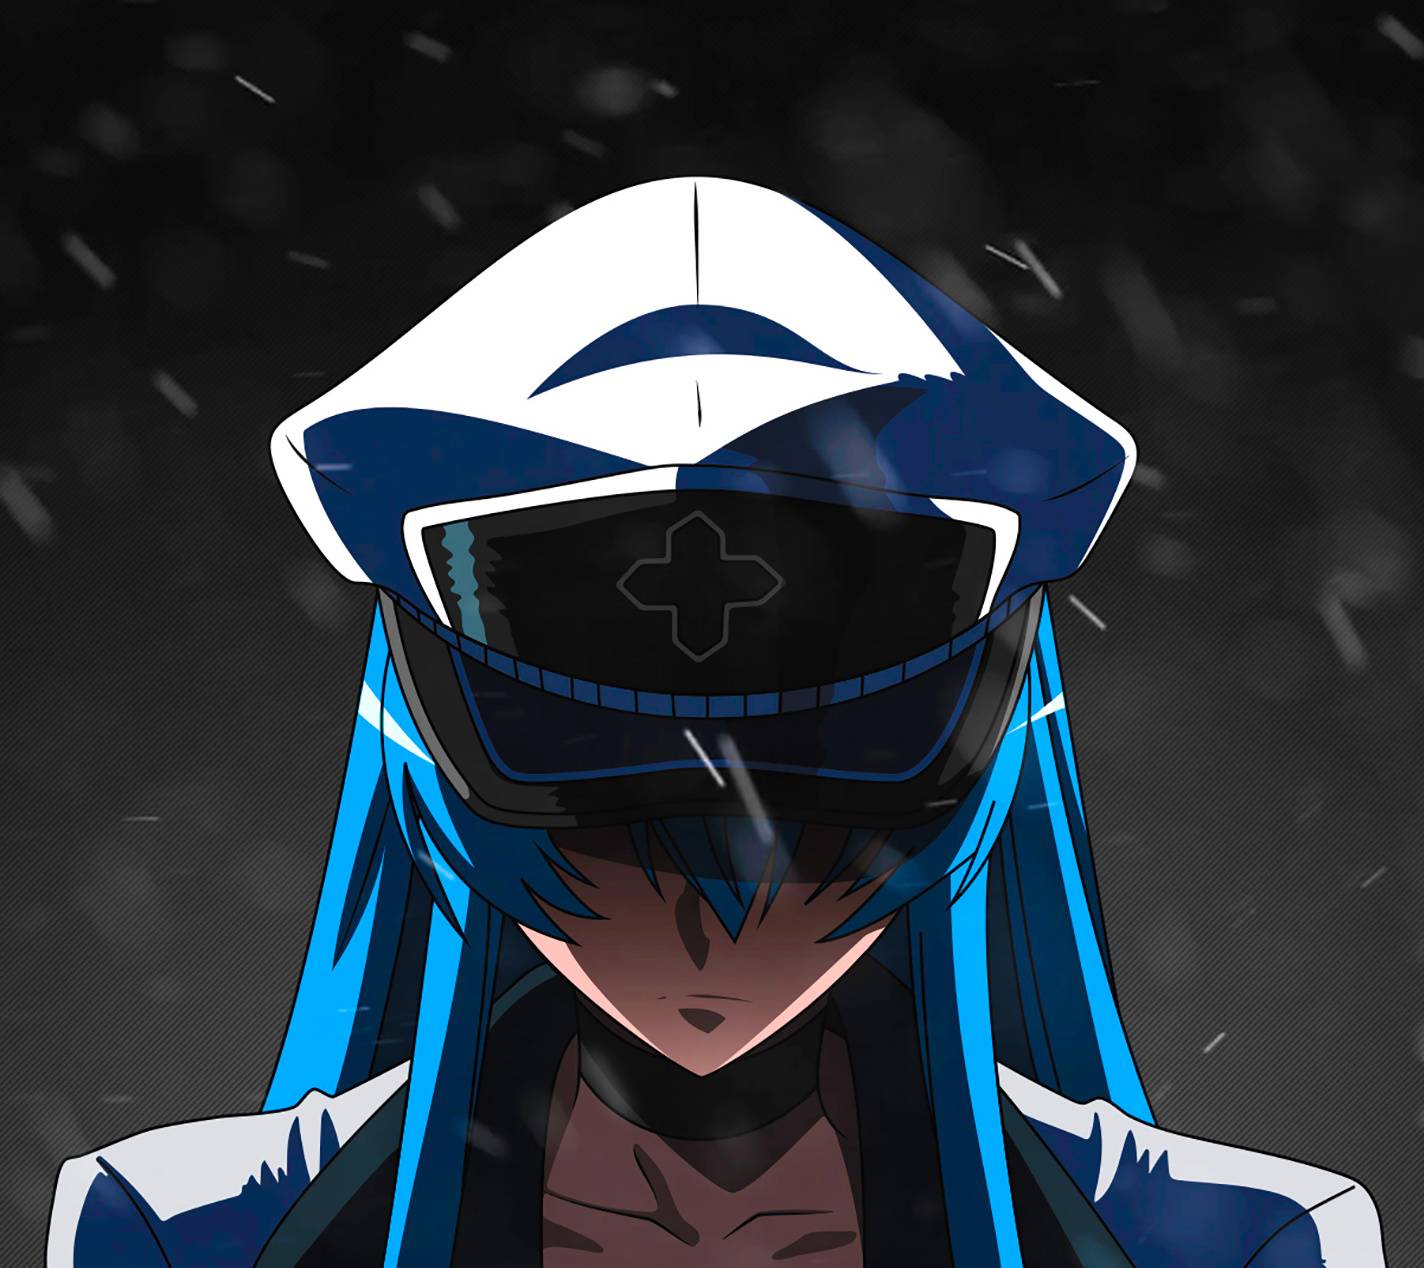 esdeath wallpaper,cartoon,anime,illustration,fictional character,graphic design